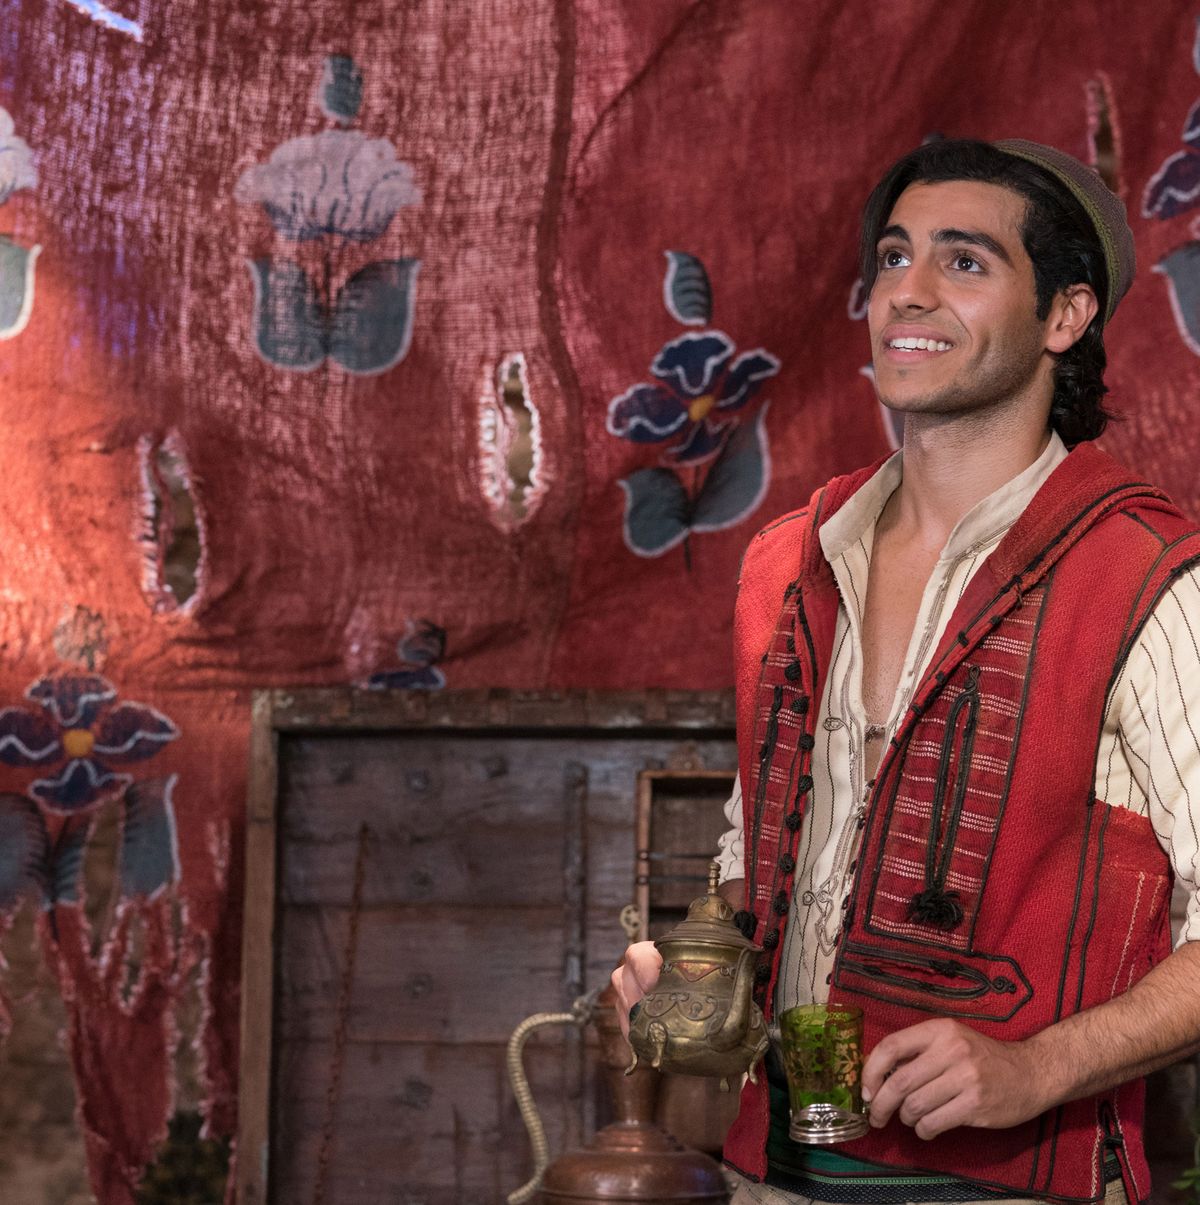 Why Aladdin is showing less skin in the Disney remake